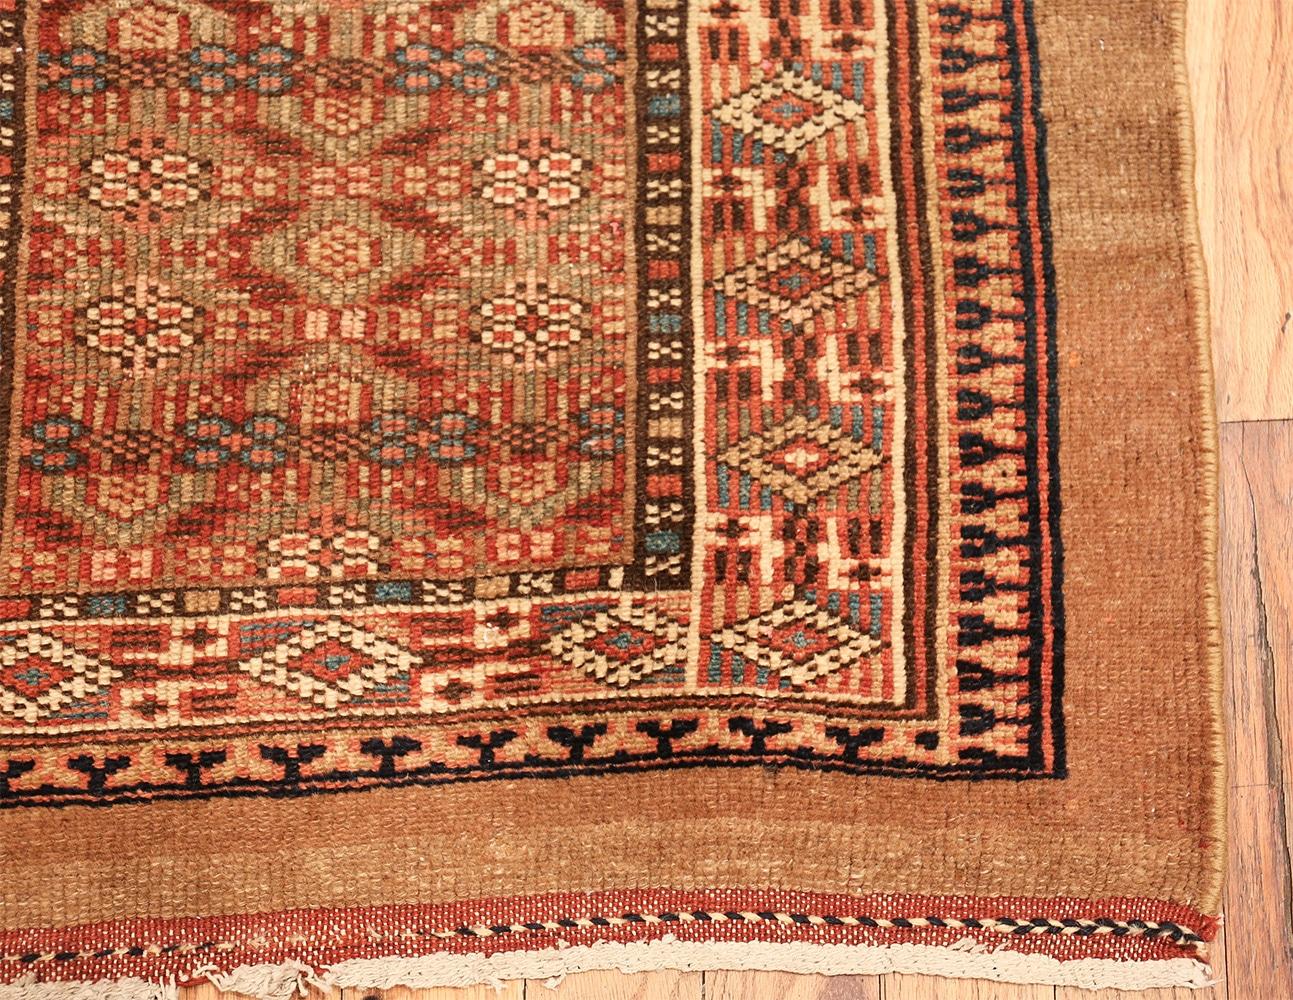 Tribal Long and Narrow Antique Persian Serab Runner Rug, Country of origin / rug type: Persian rug, Circa date: 1900. Size: 2 ft 8 in x 16 ft 5 in (0.81 m x 5 m)

